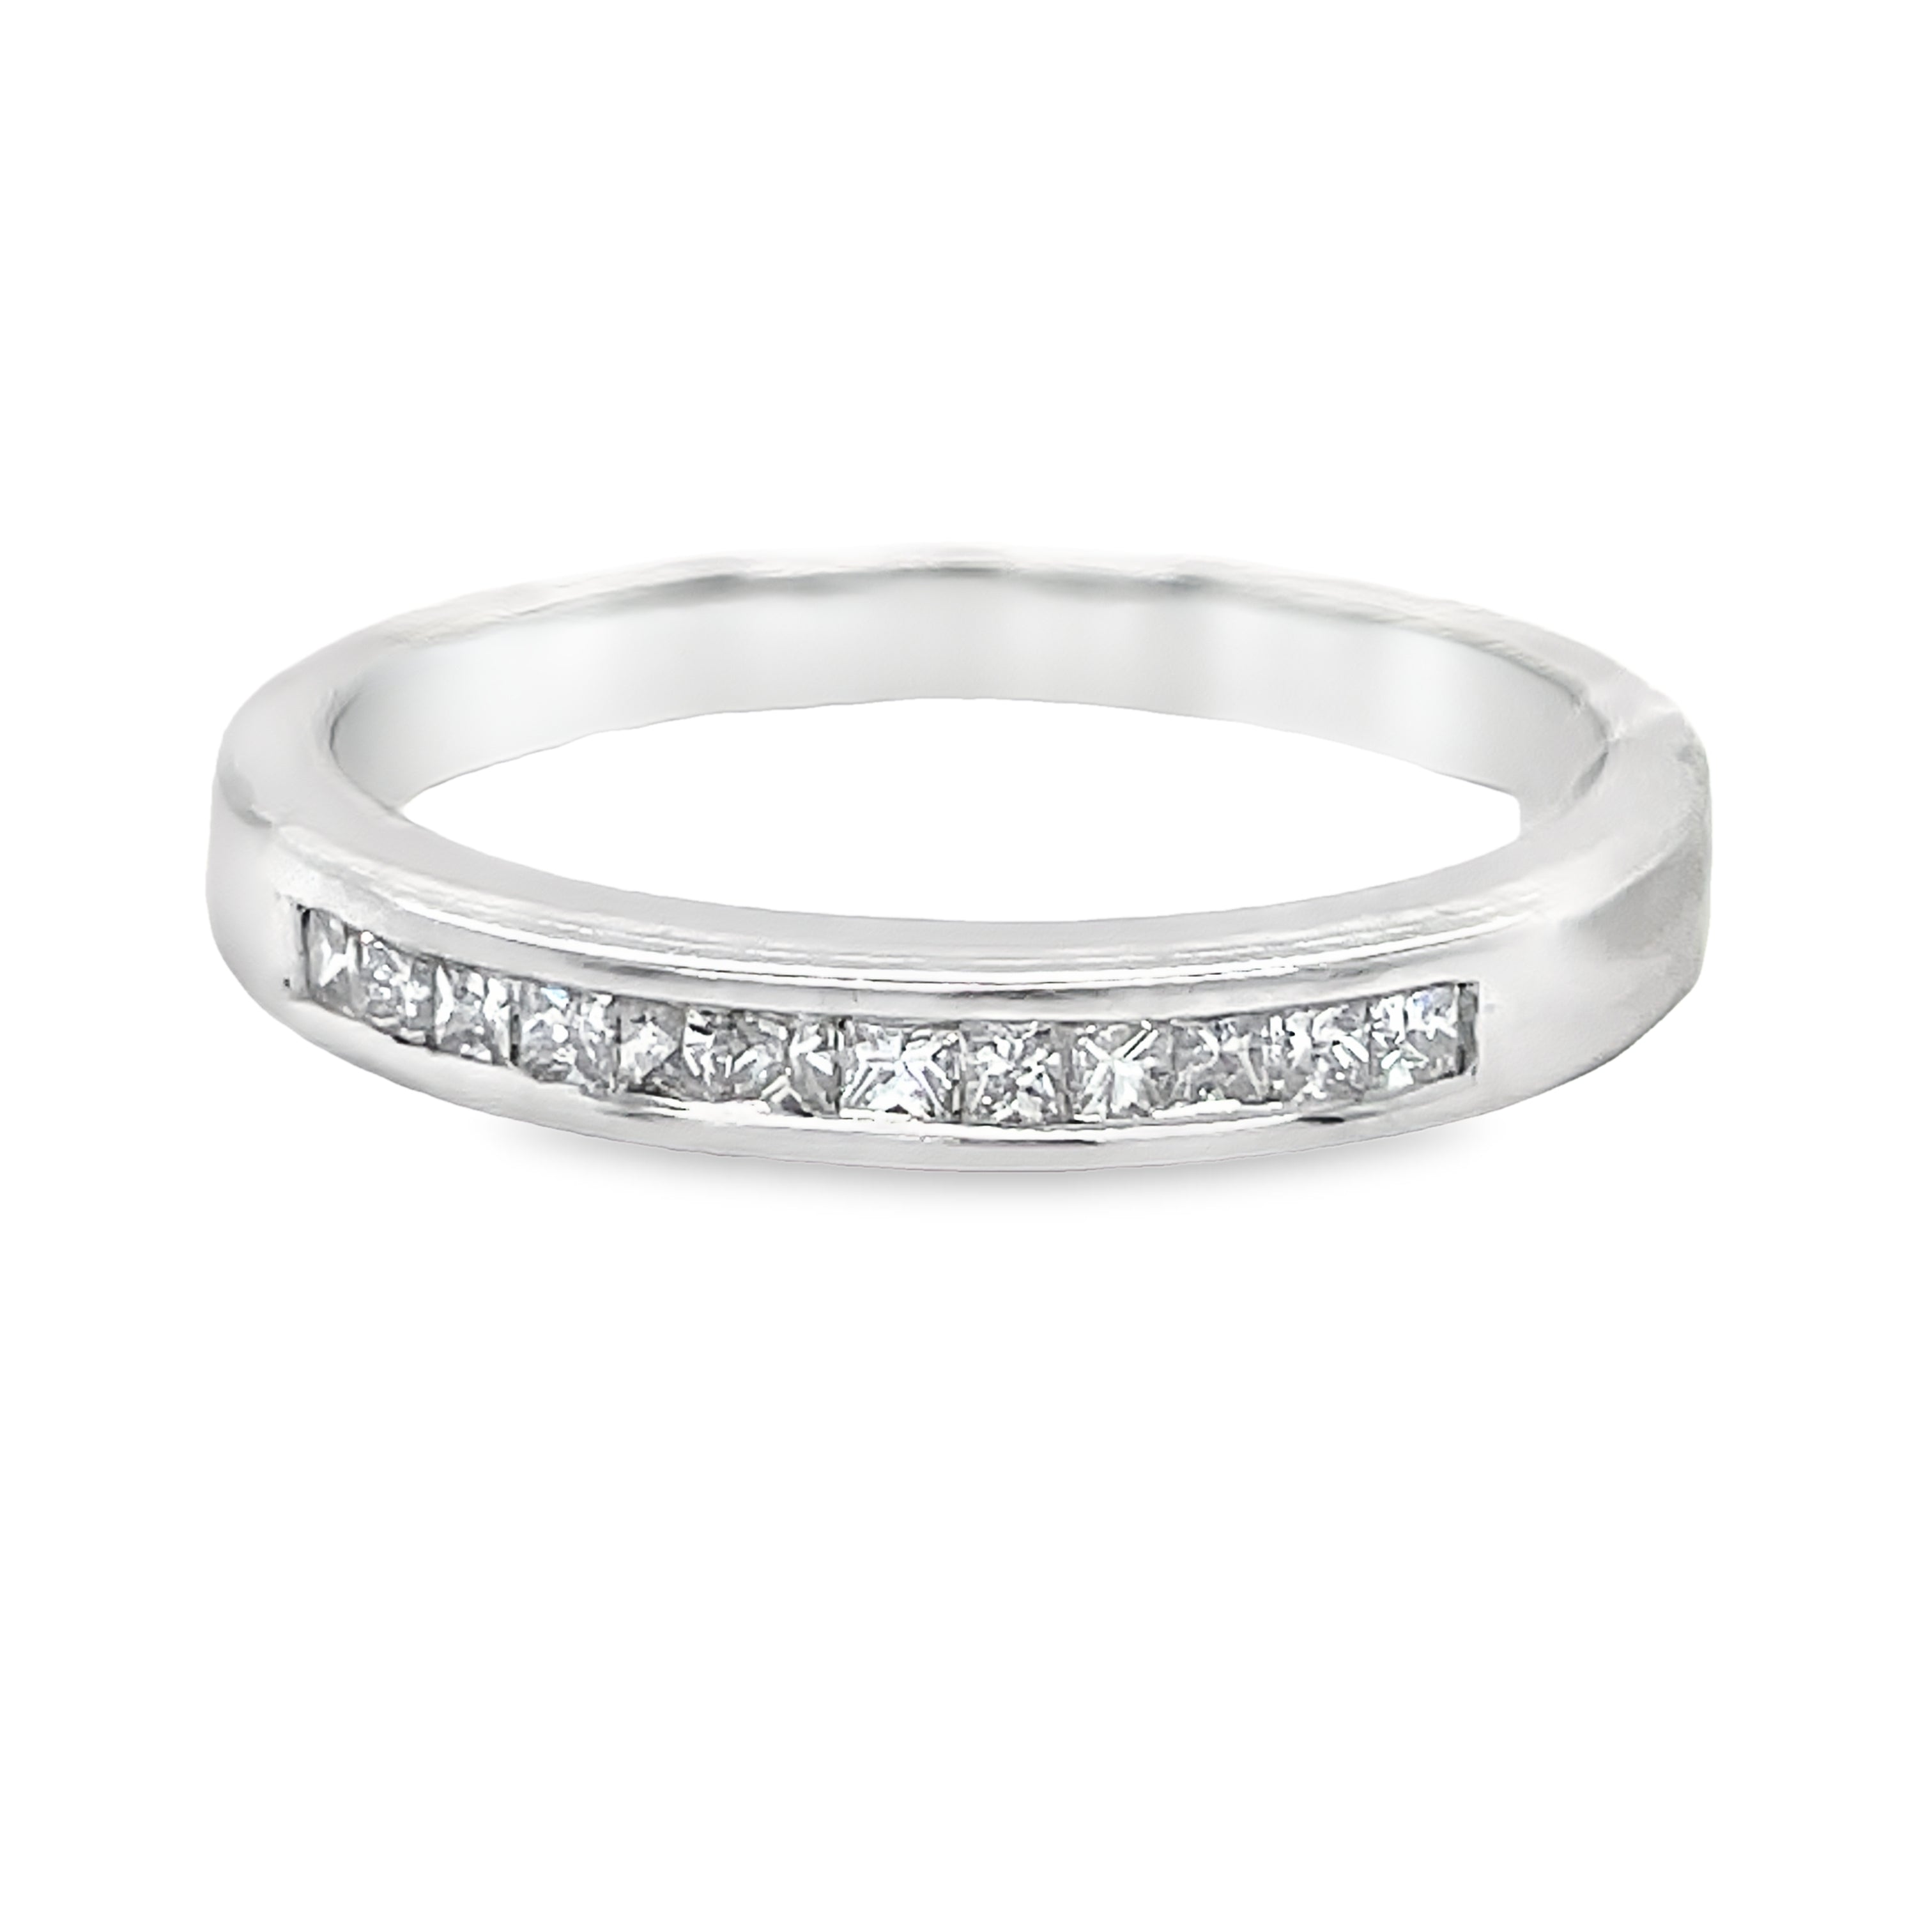 This stunning Princess Cut Anniversary Diamond Band features a sparkling 0.30 carat princess cut diamond set in enduring 14k white gold. With its elegant channel setting, this band is both classic and timeless, making it the perfect symbol of everlasting love and commitment.